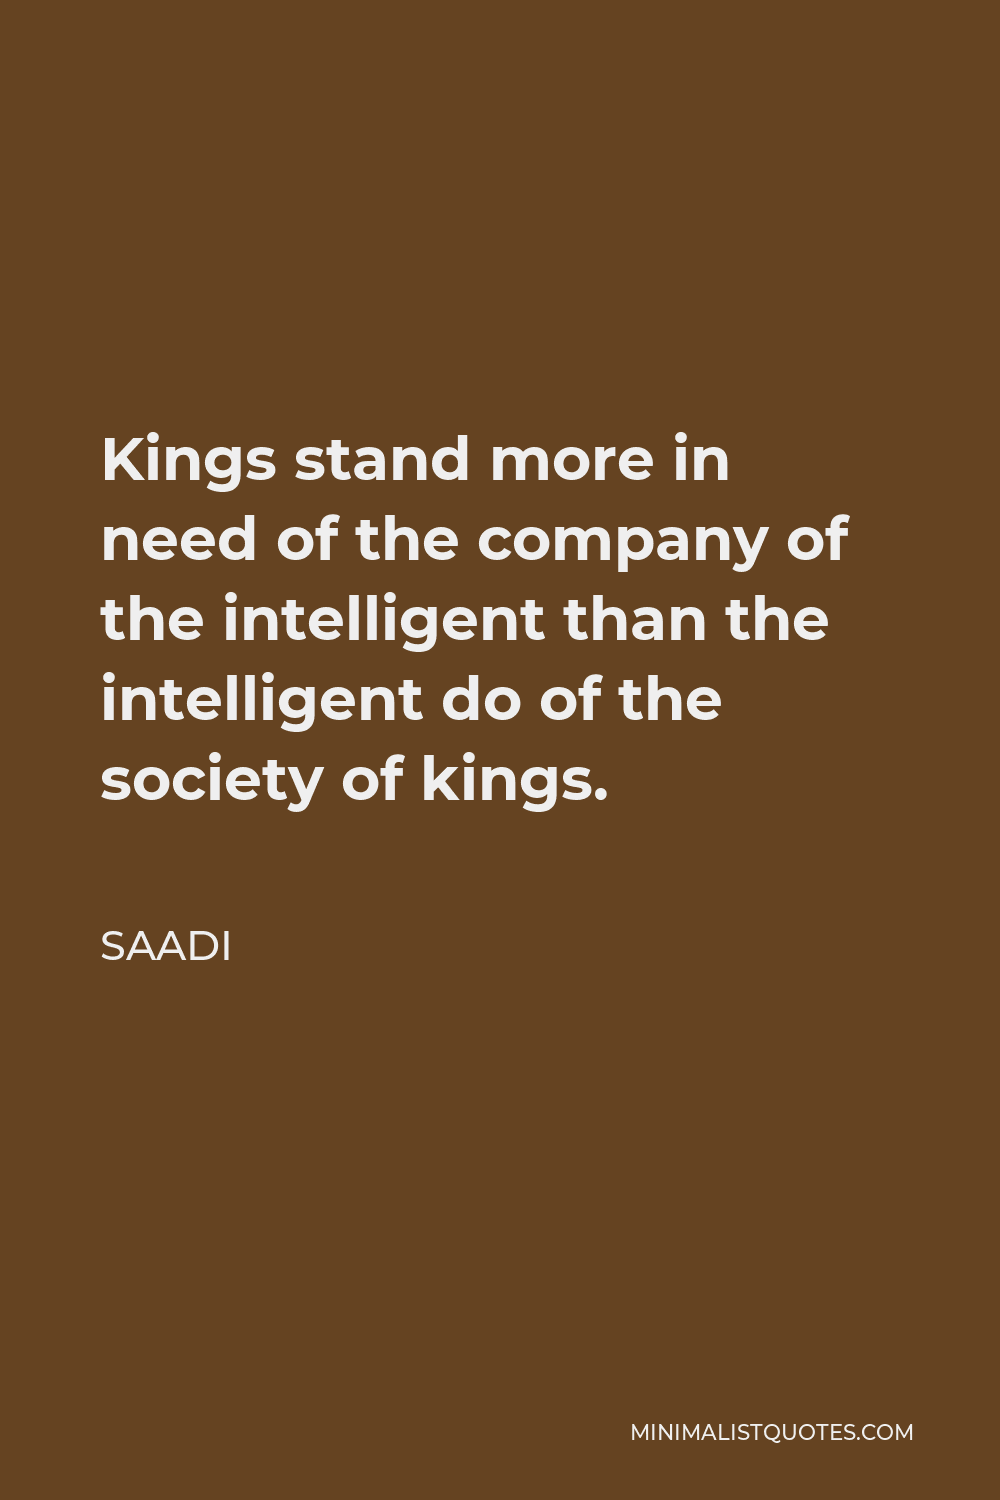 Saadi Quote - Kings stand more in need of the company of the intelligent than the intelligent do of the society of kings.